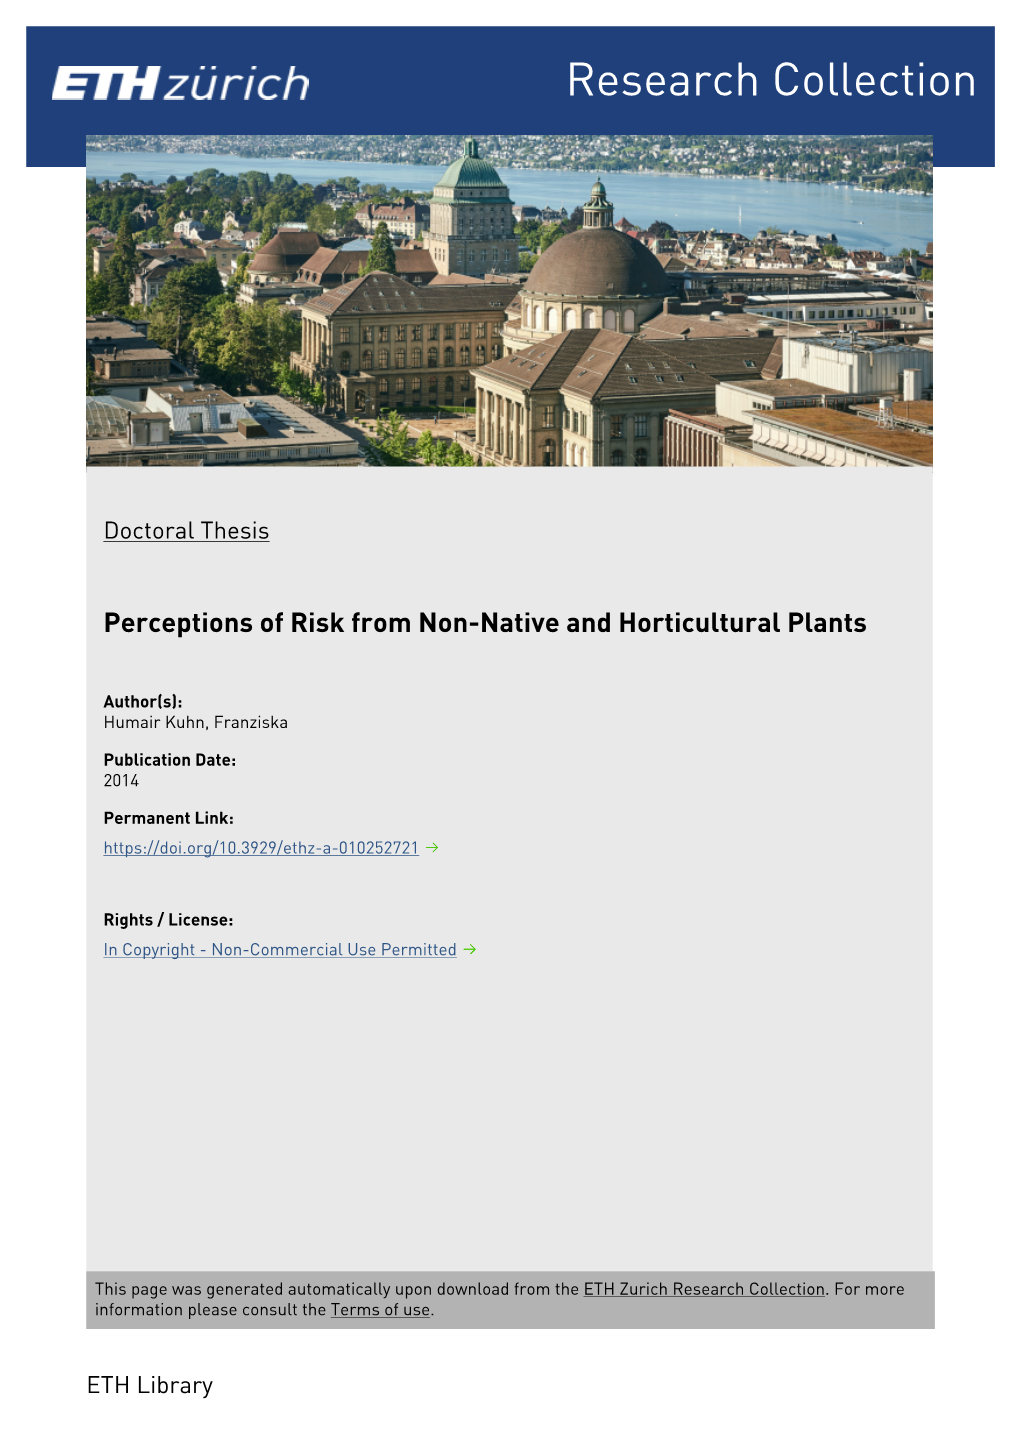 Perceptions of Risk from Non-Native and Horticultural Plants